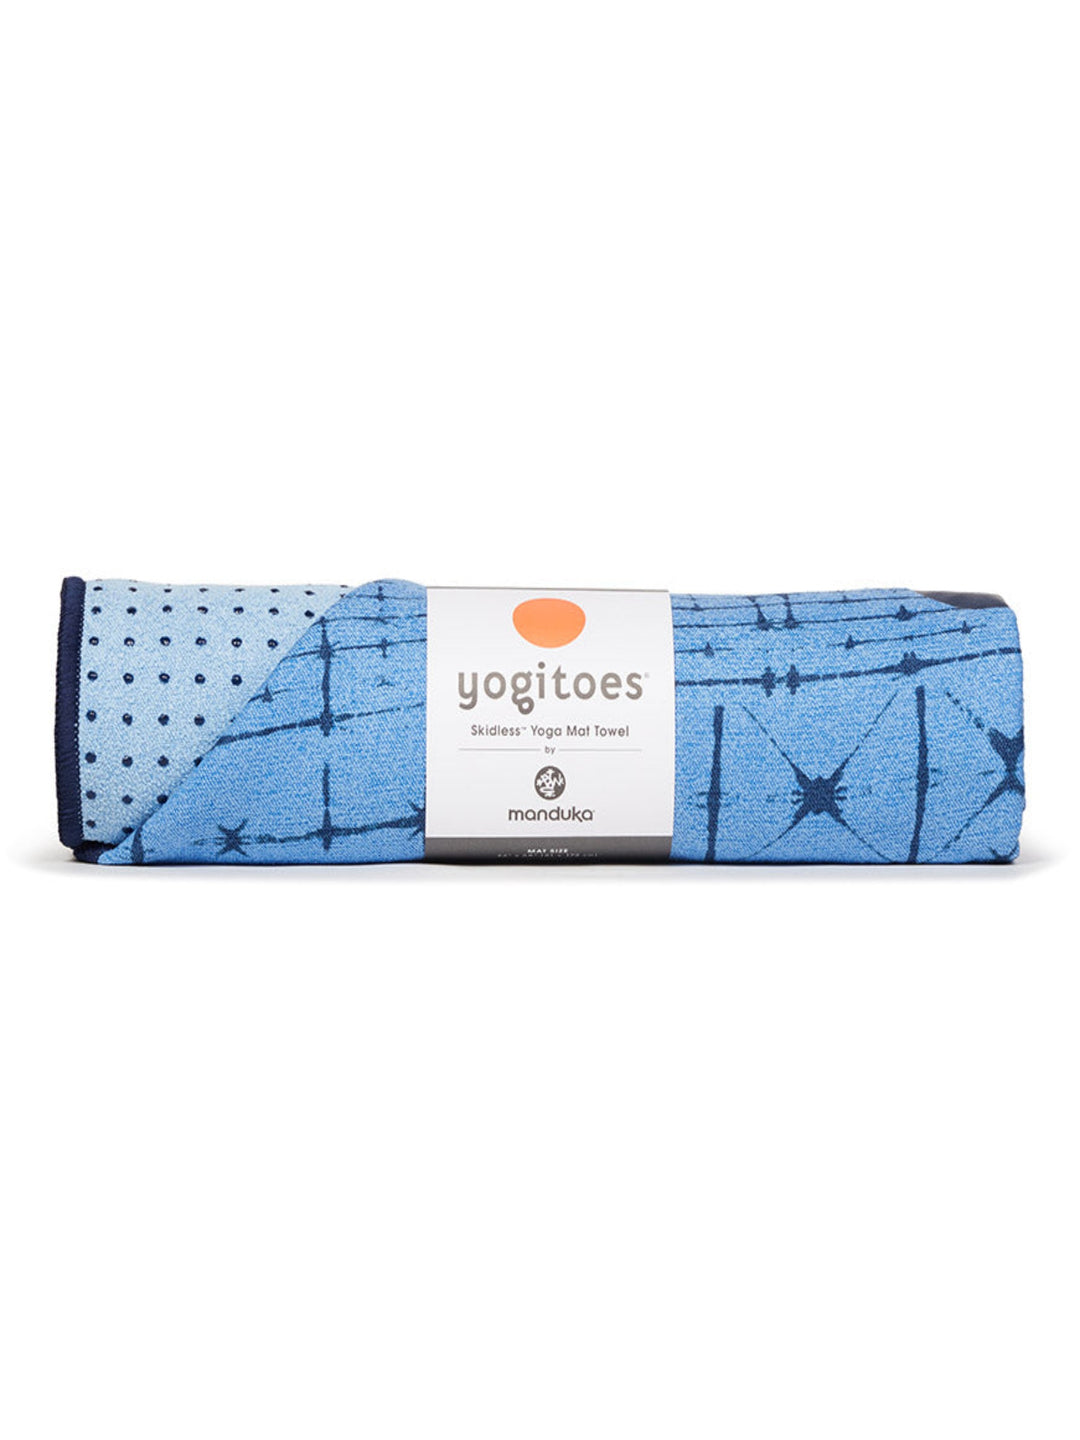 Manduka Yogitoes Yoga Towel for Mat, Non-Slip and Quick Dry for Hot Yoga  with Rubber Bottom Grip Dots,Thin and Lightweight, 71 Inches Long, Geija